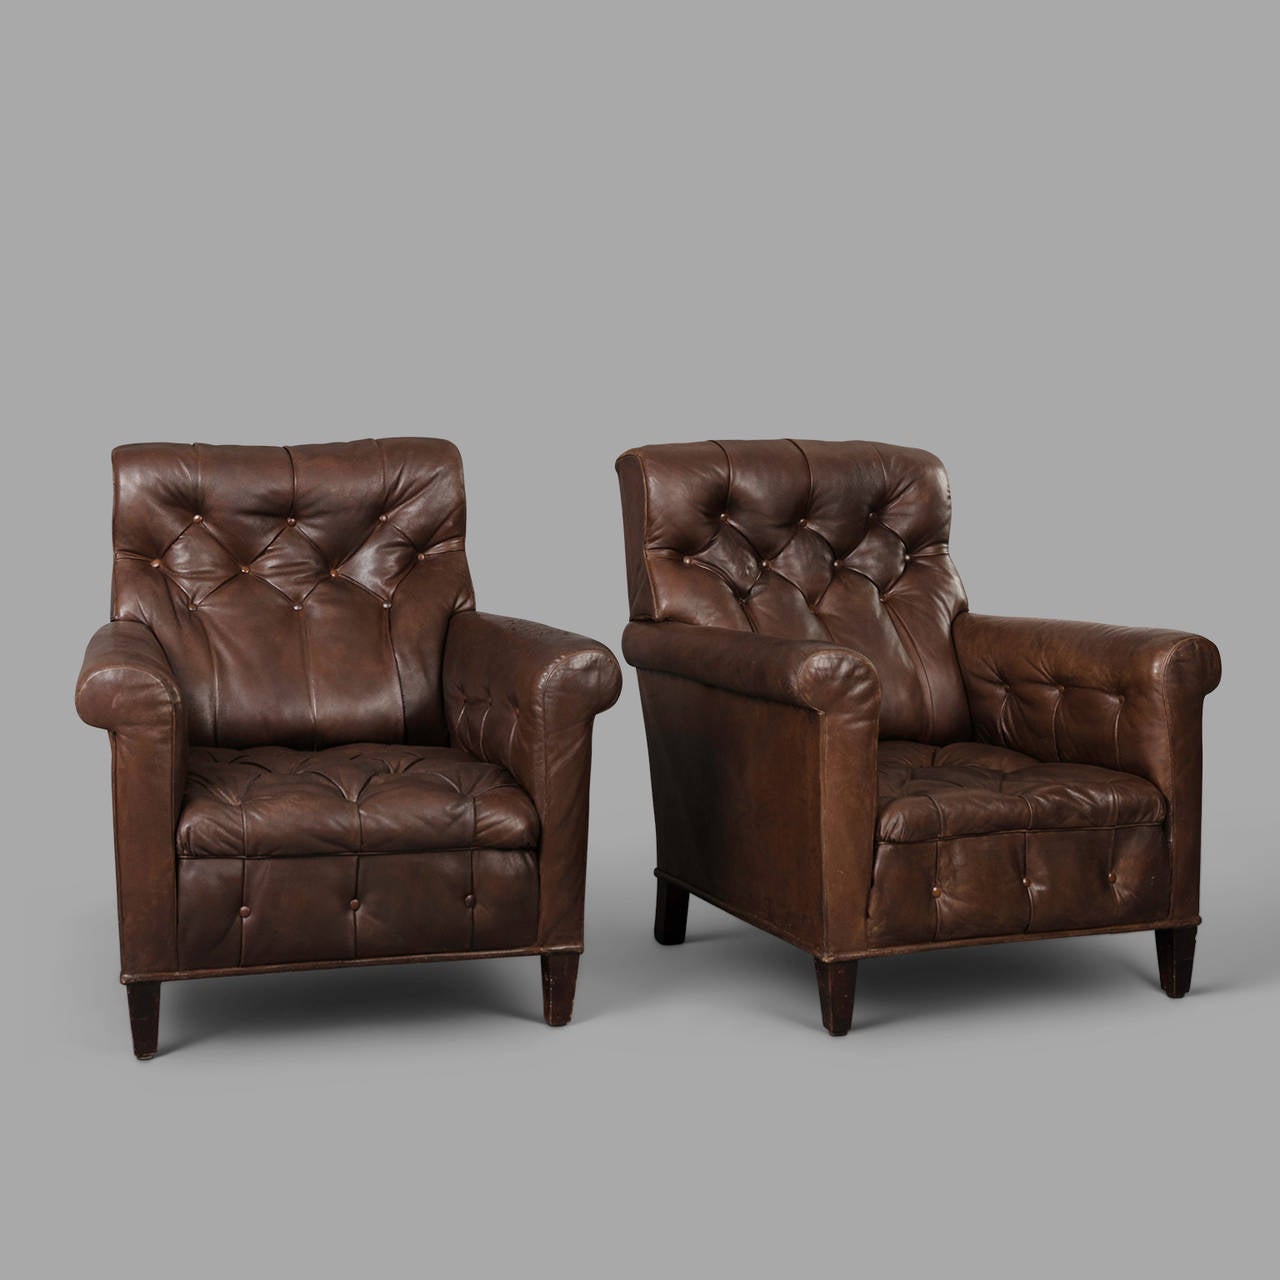 Leather patina highly enhanced by the time for this pair of early 20th century tufted leather armchairs.

Few expert restorations to strengthen the leather.